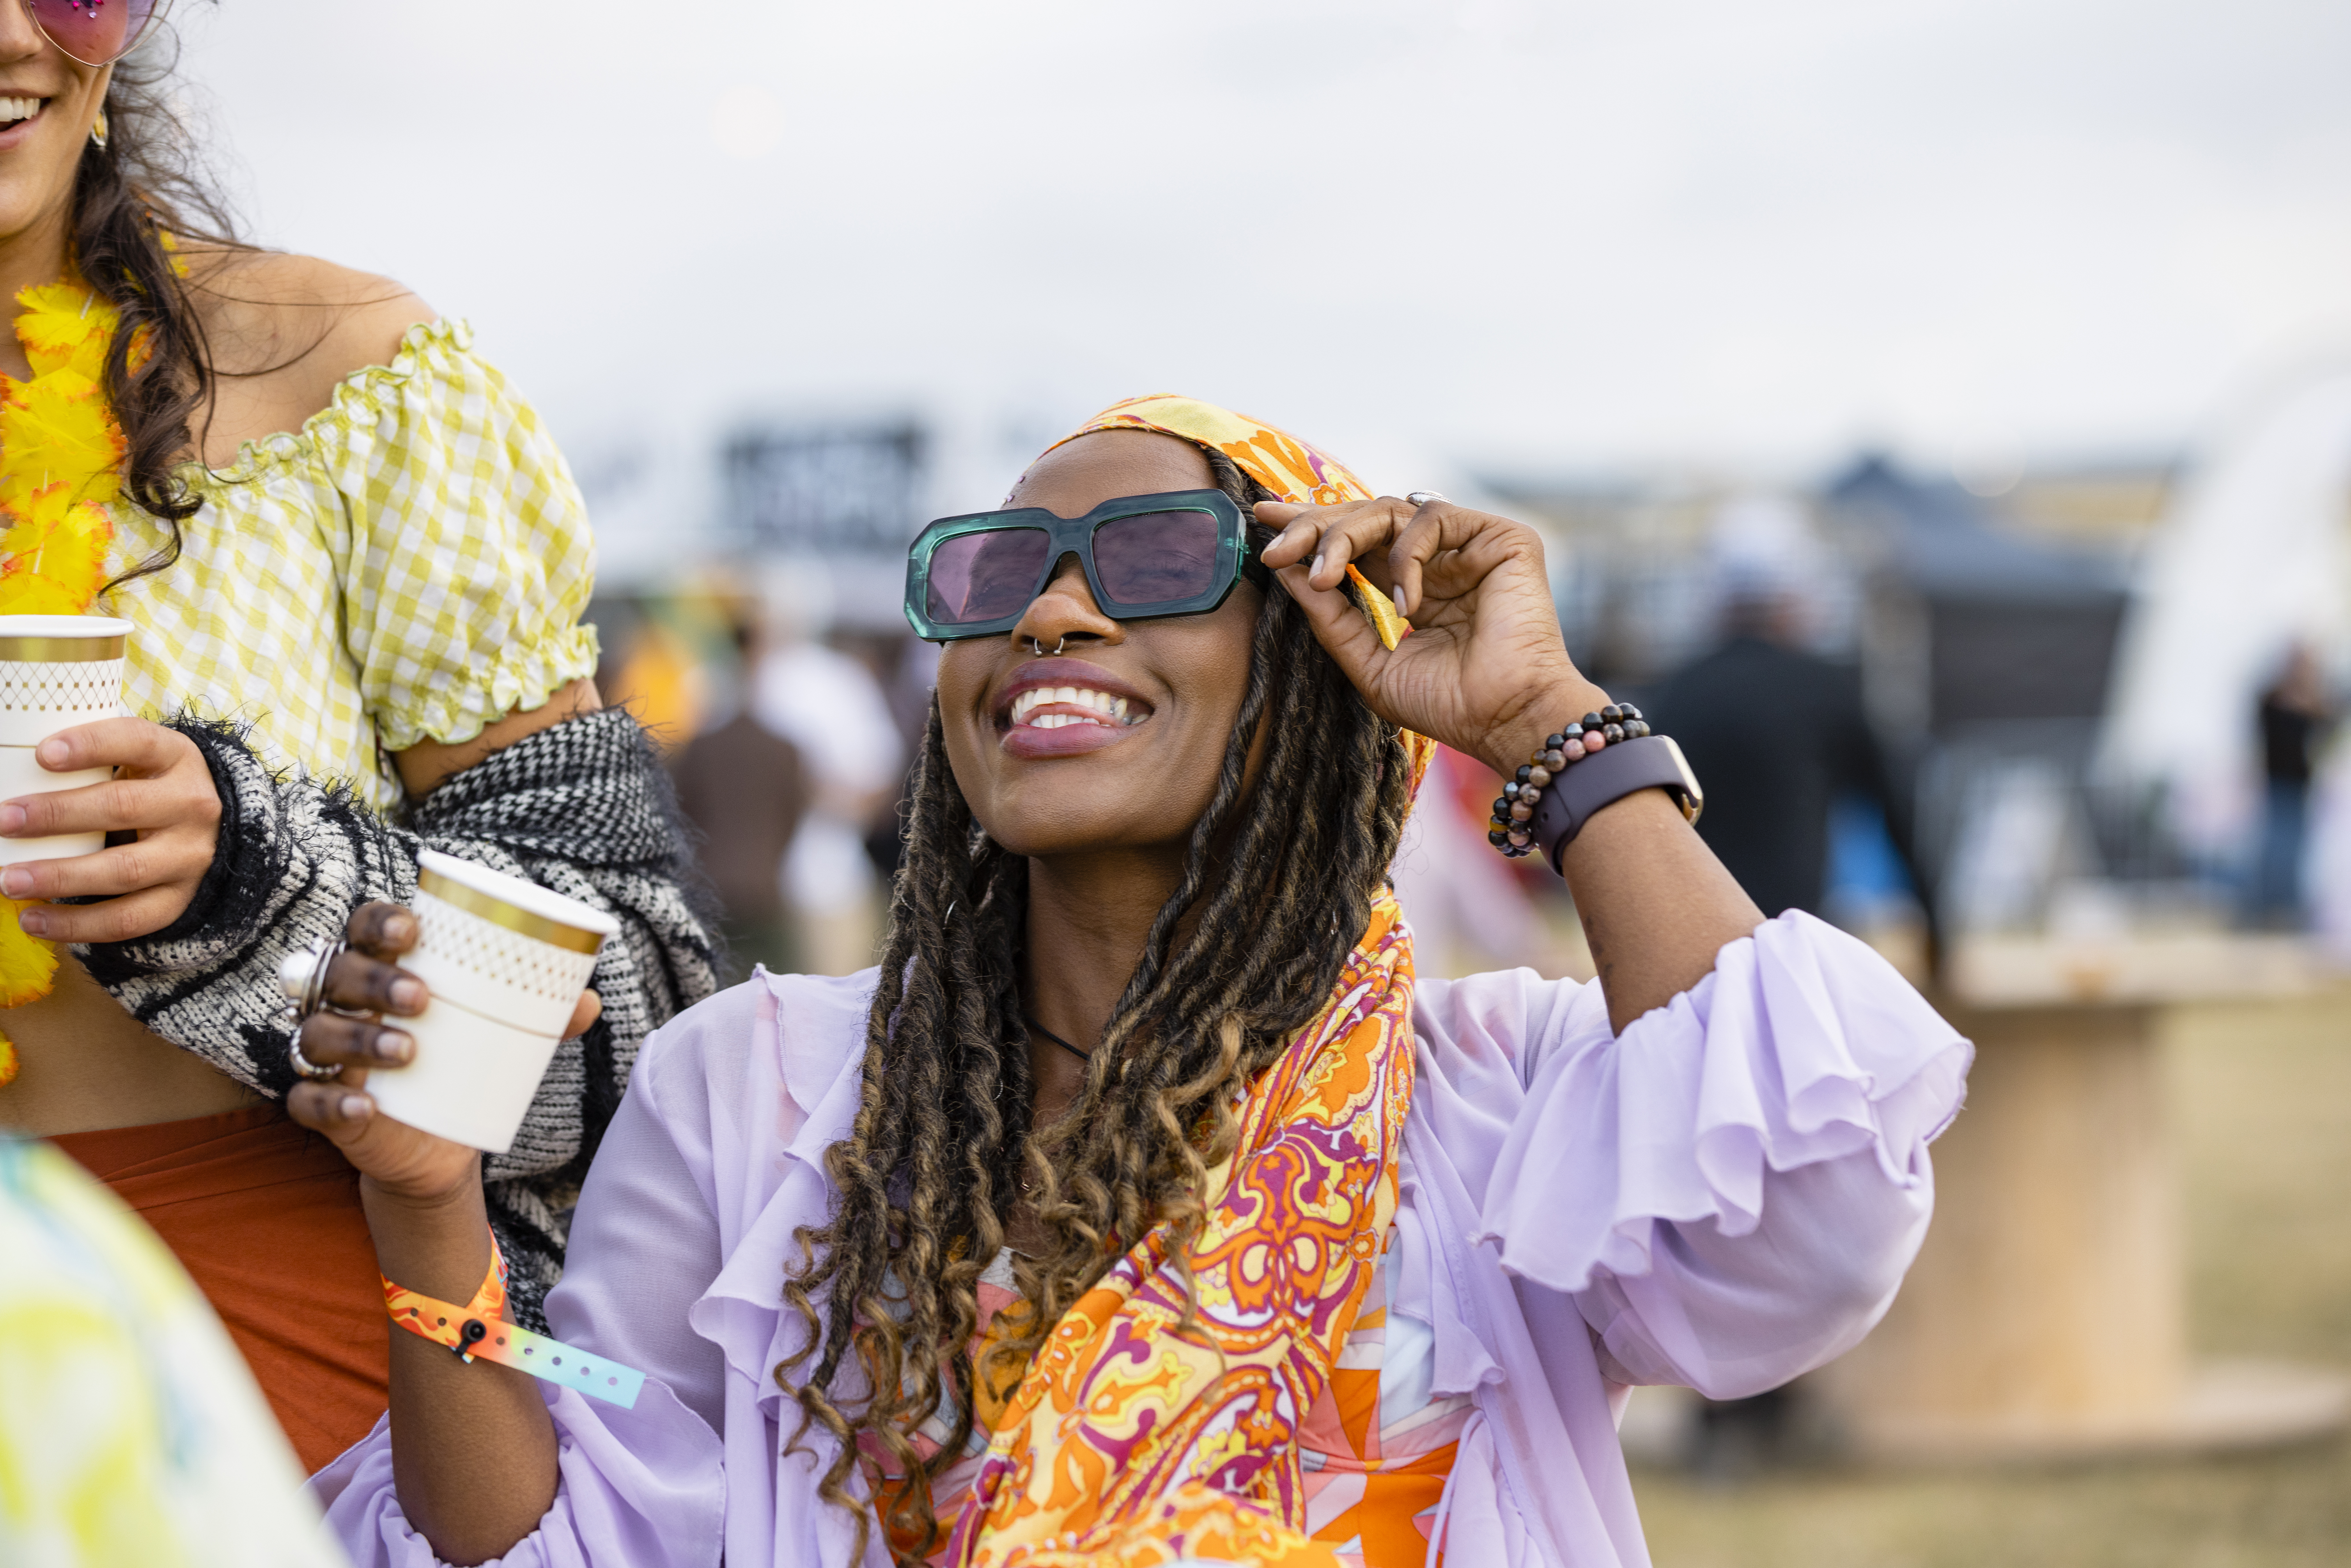 6 Trendy Festival Accessories To Show Off This Summer